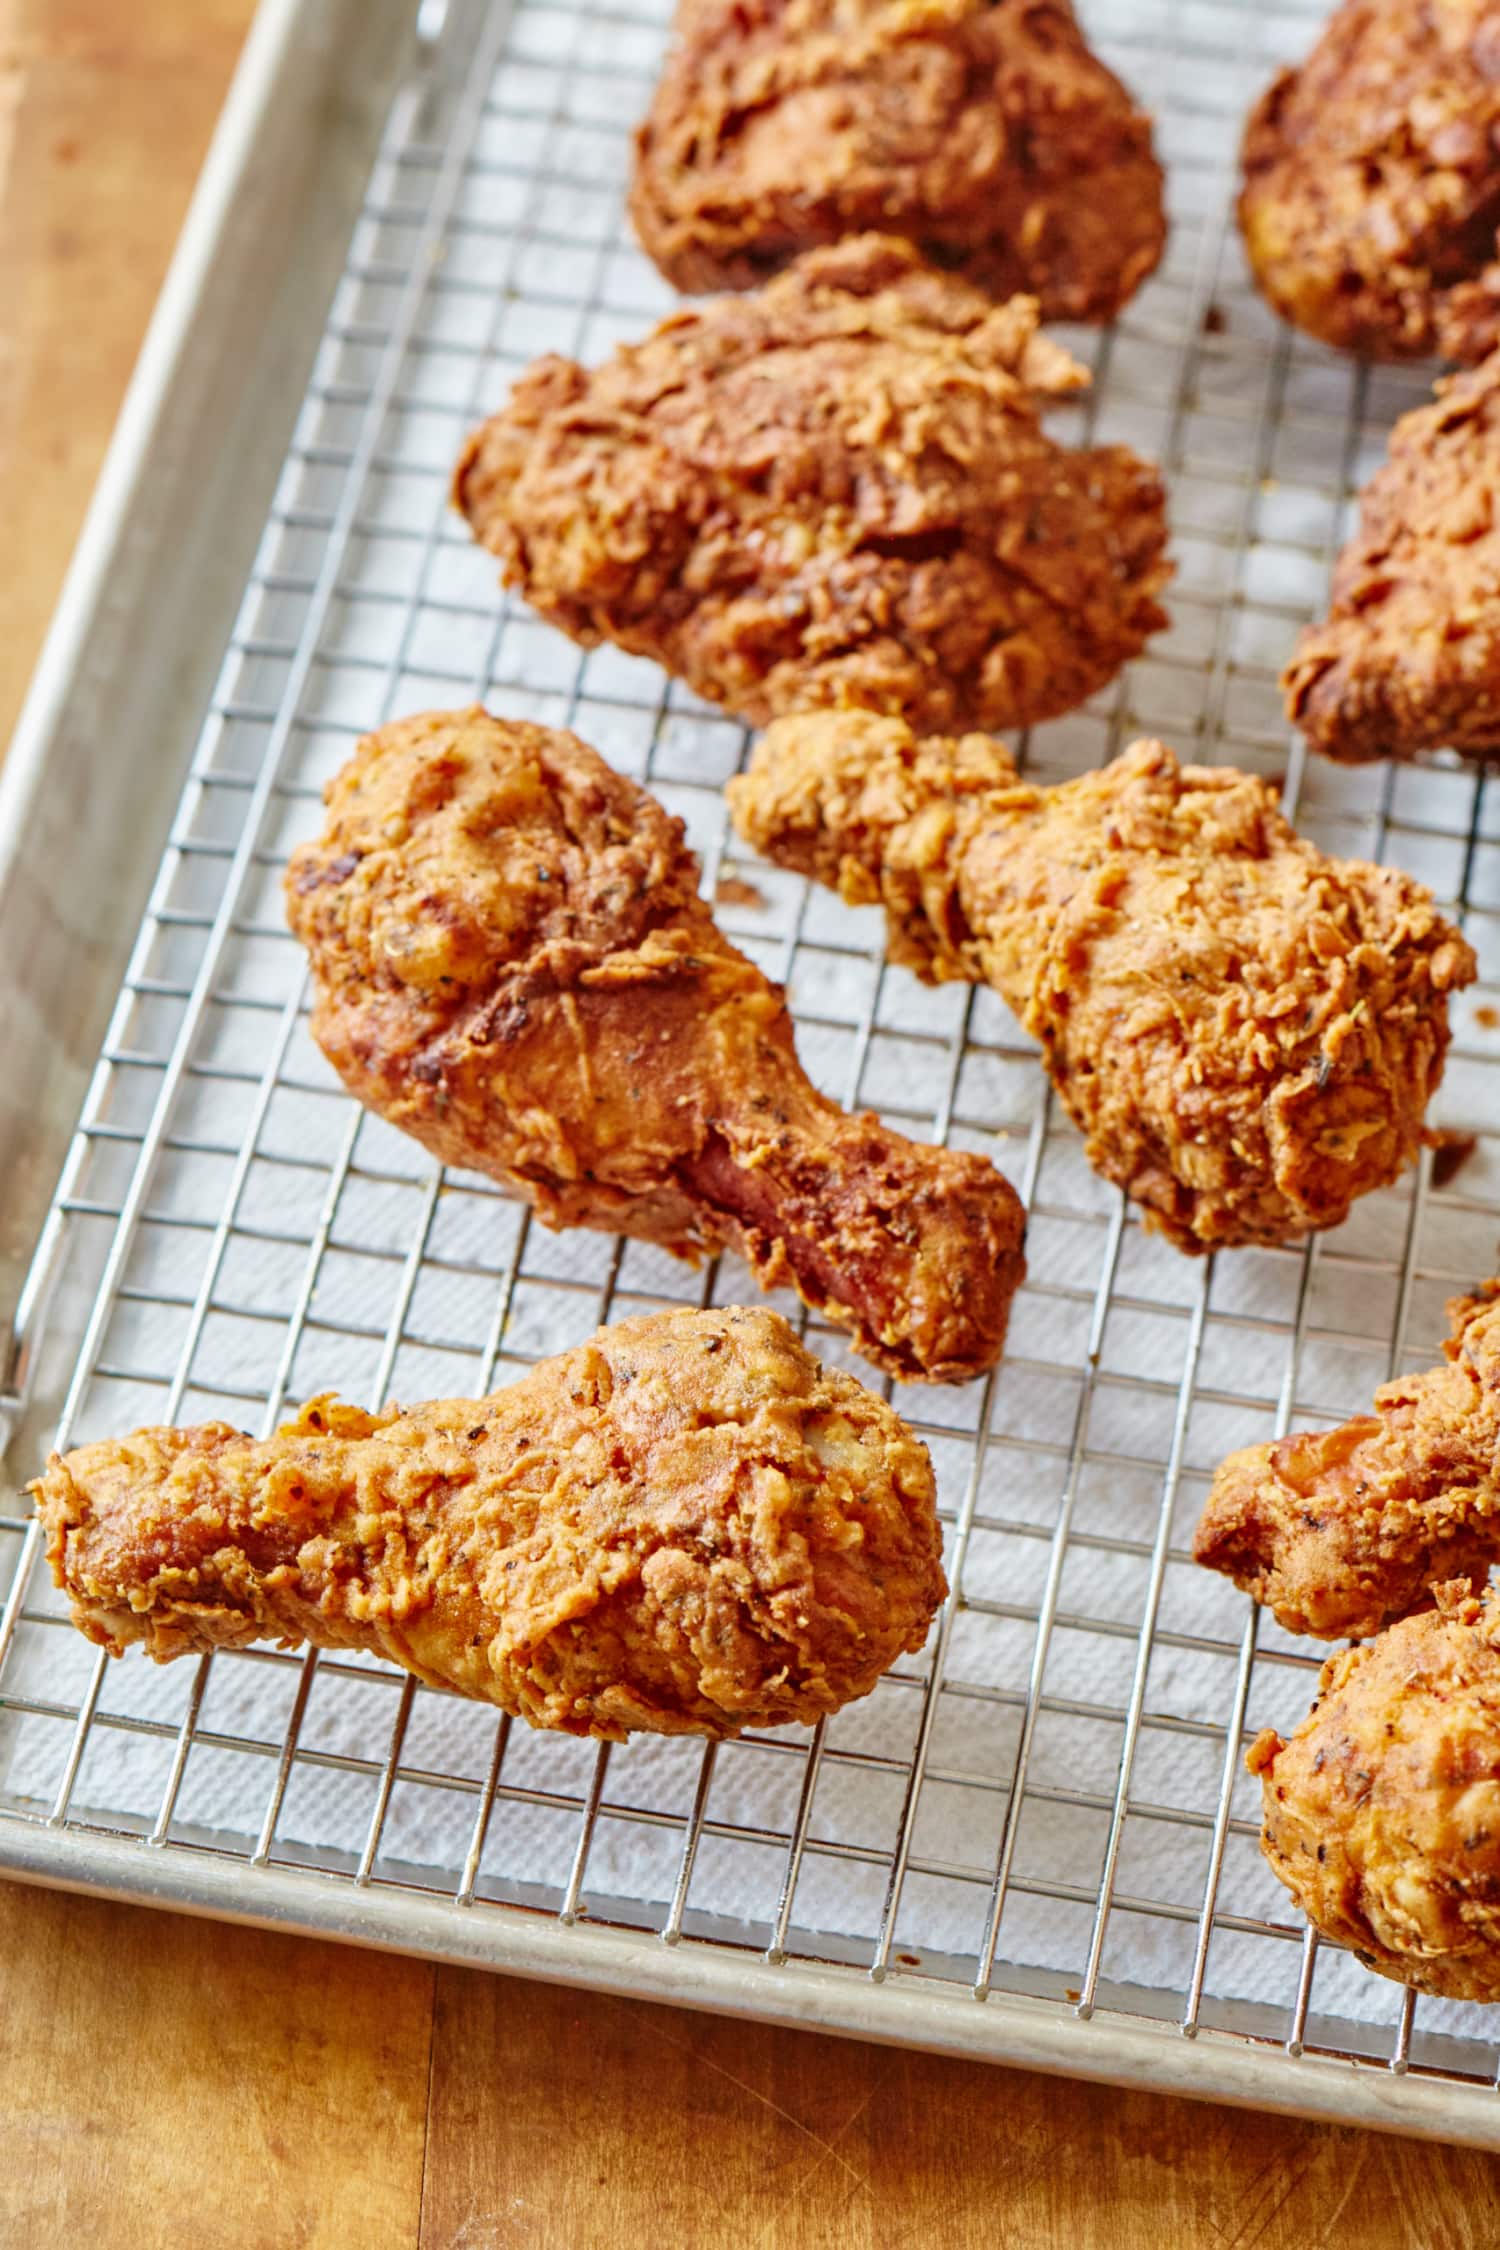 How to make crispy, juicy fried chicken